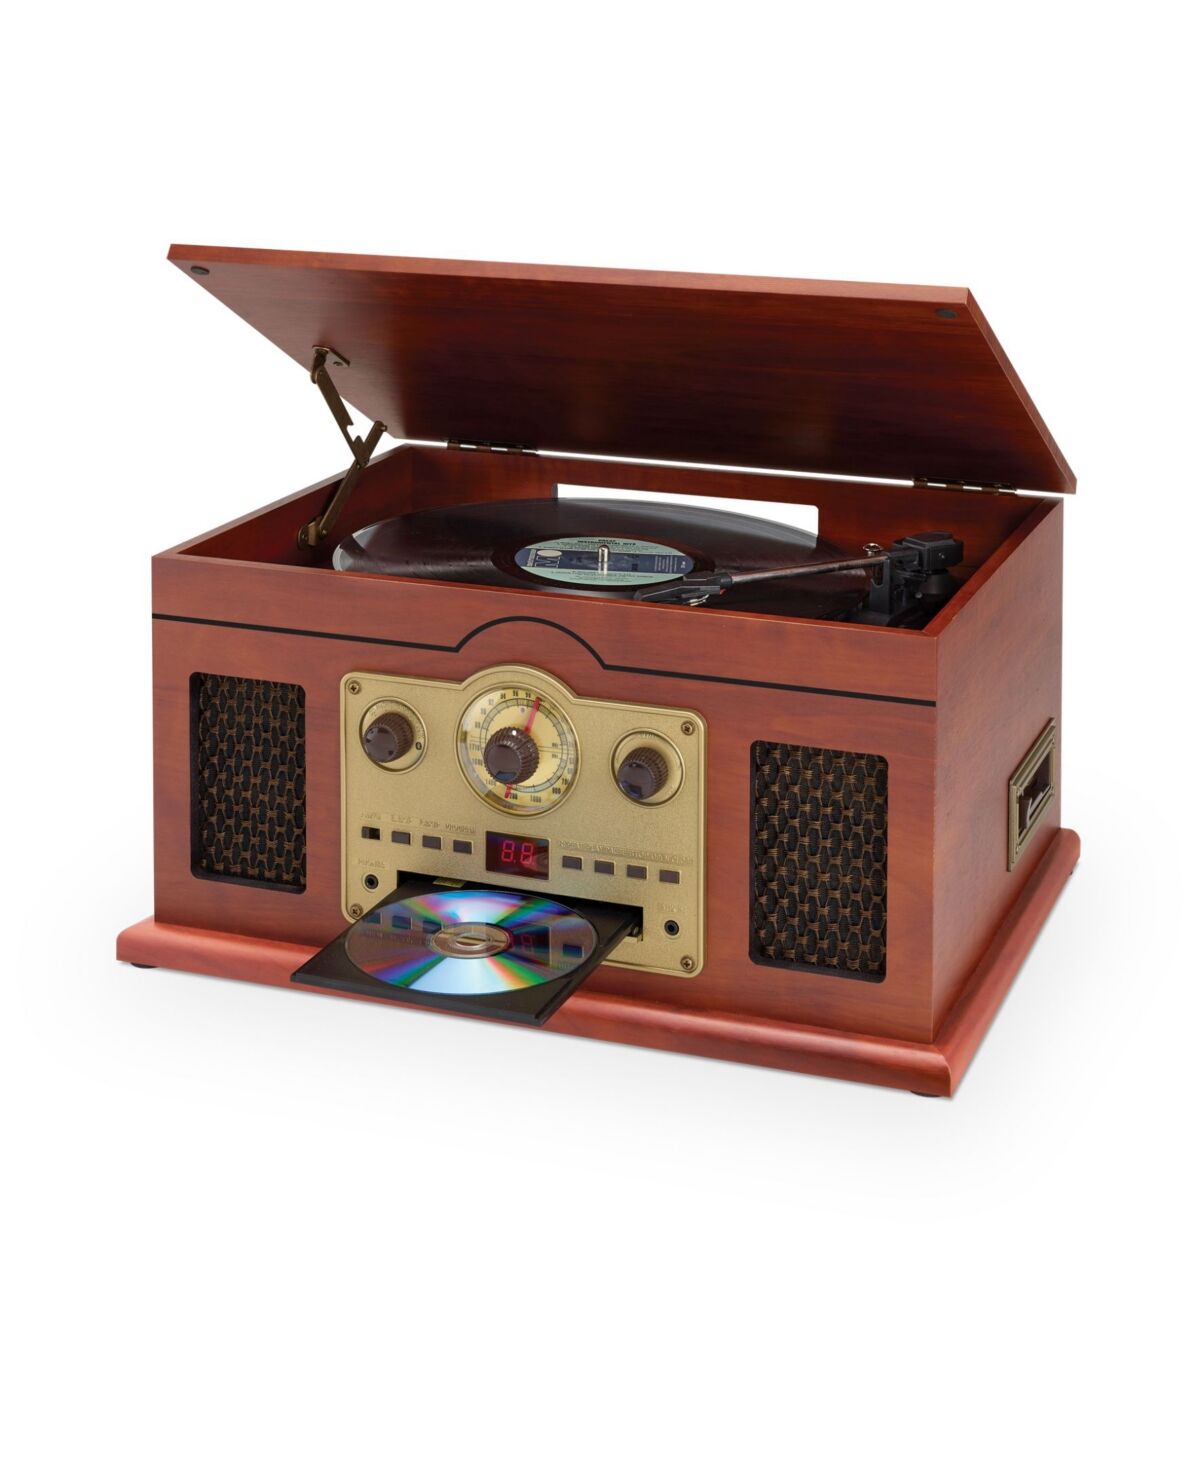 iLive 6-in-1 Bluetooth Turntable with Cd or Cassette Players and Am or Fm Radio, ITTB610LW - Brown